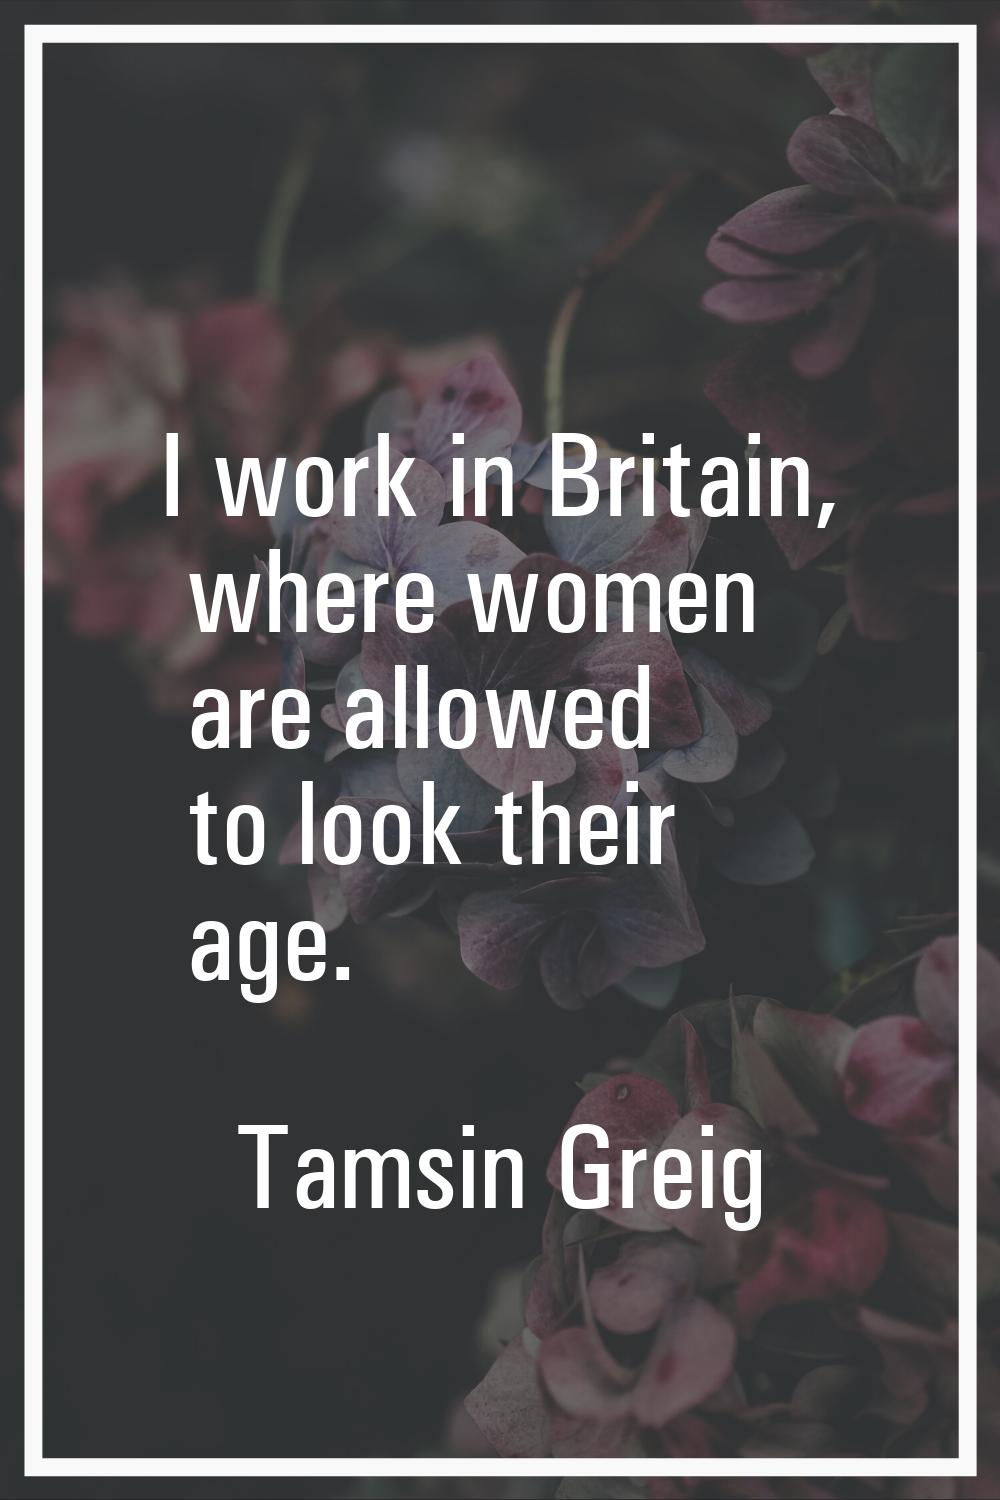 I work in Britain, where women are allowed to look their age.